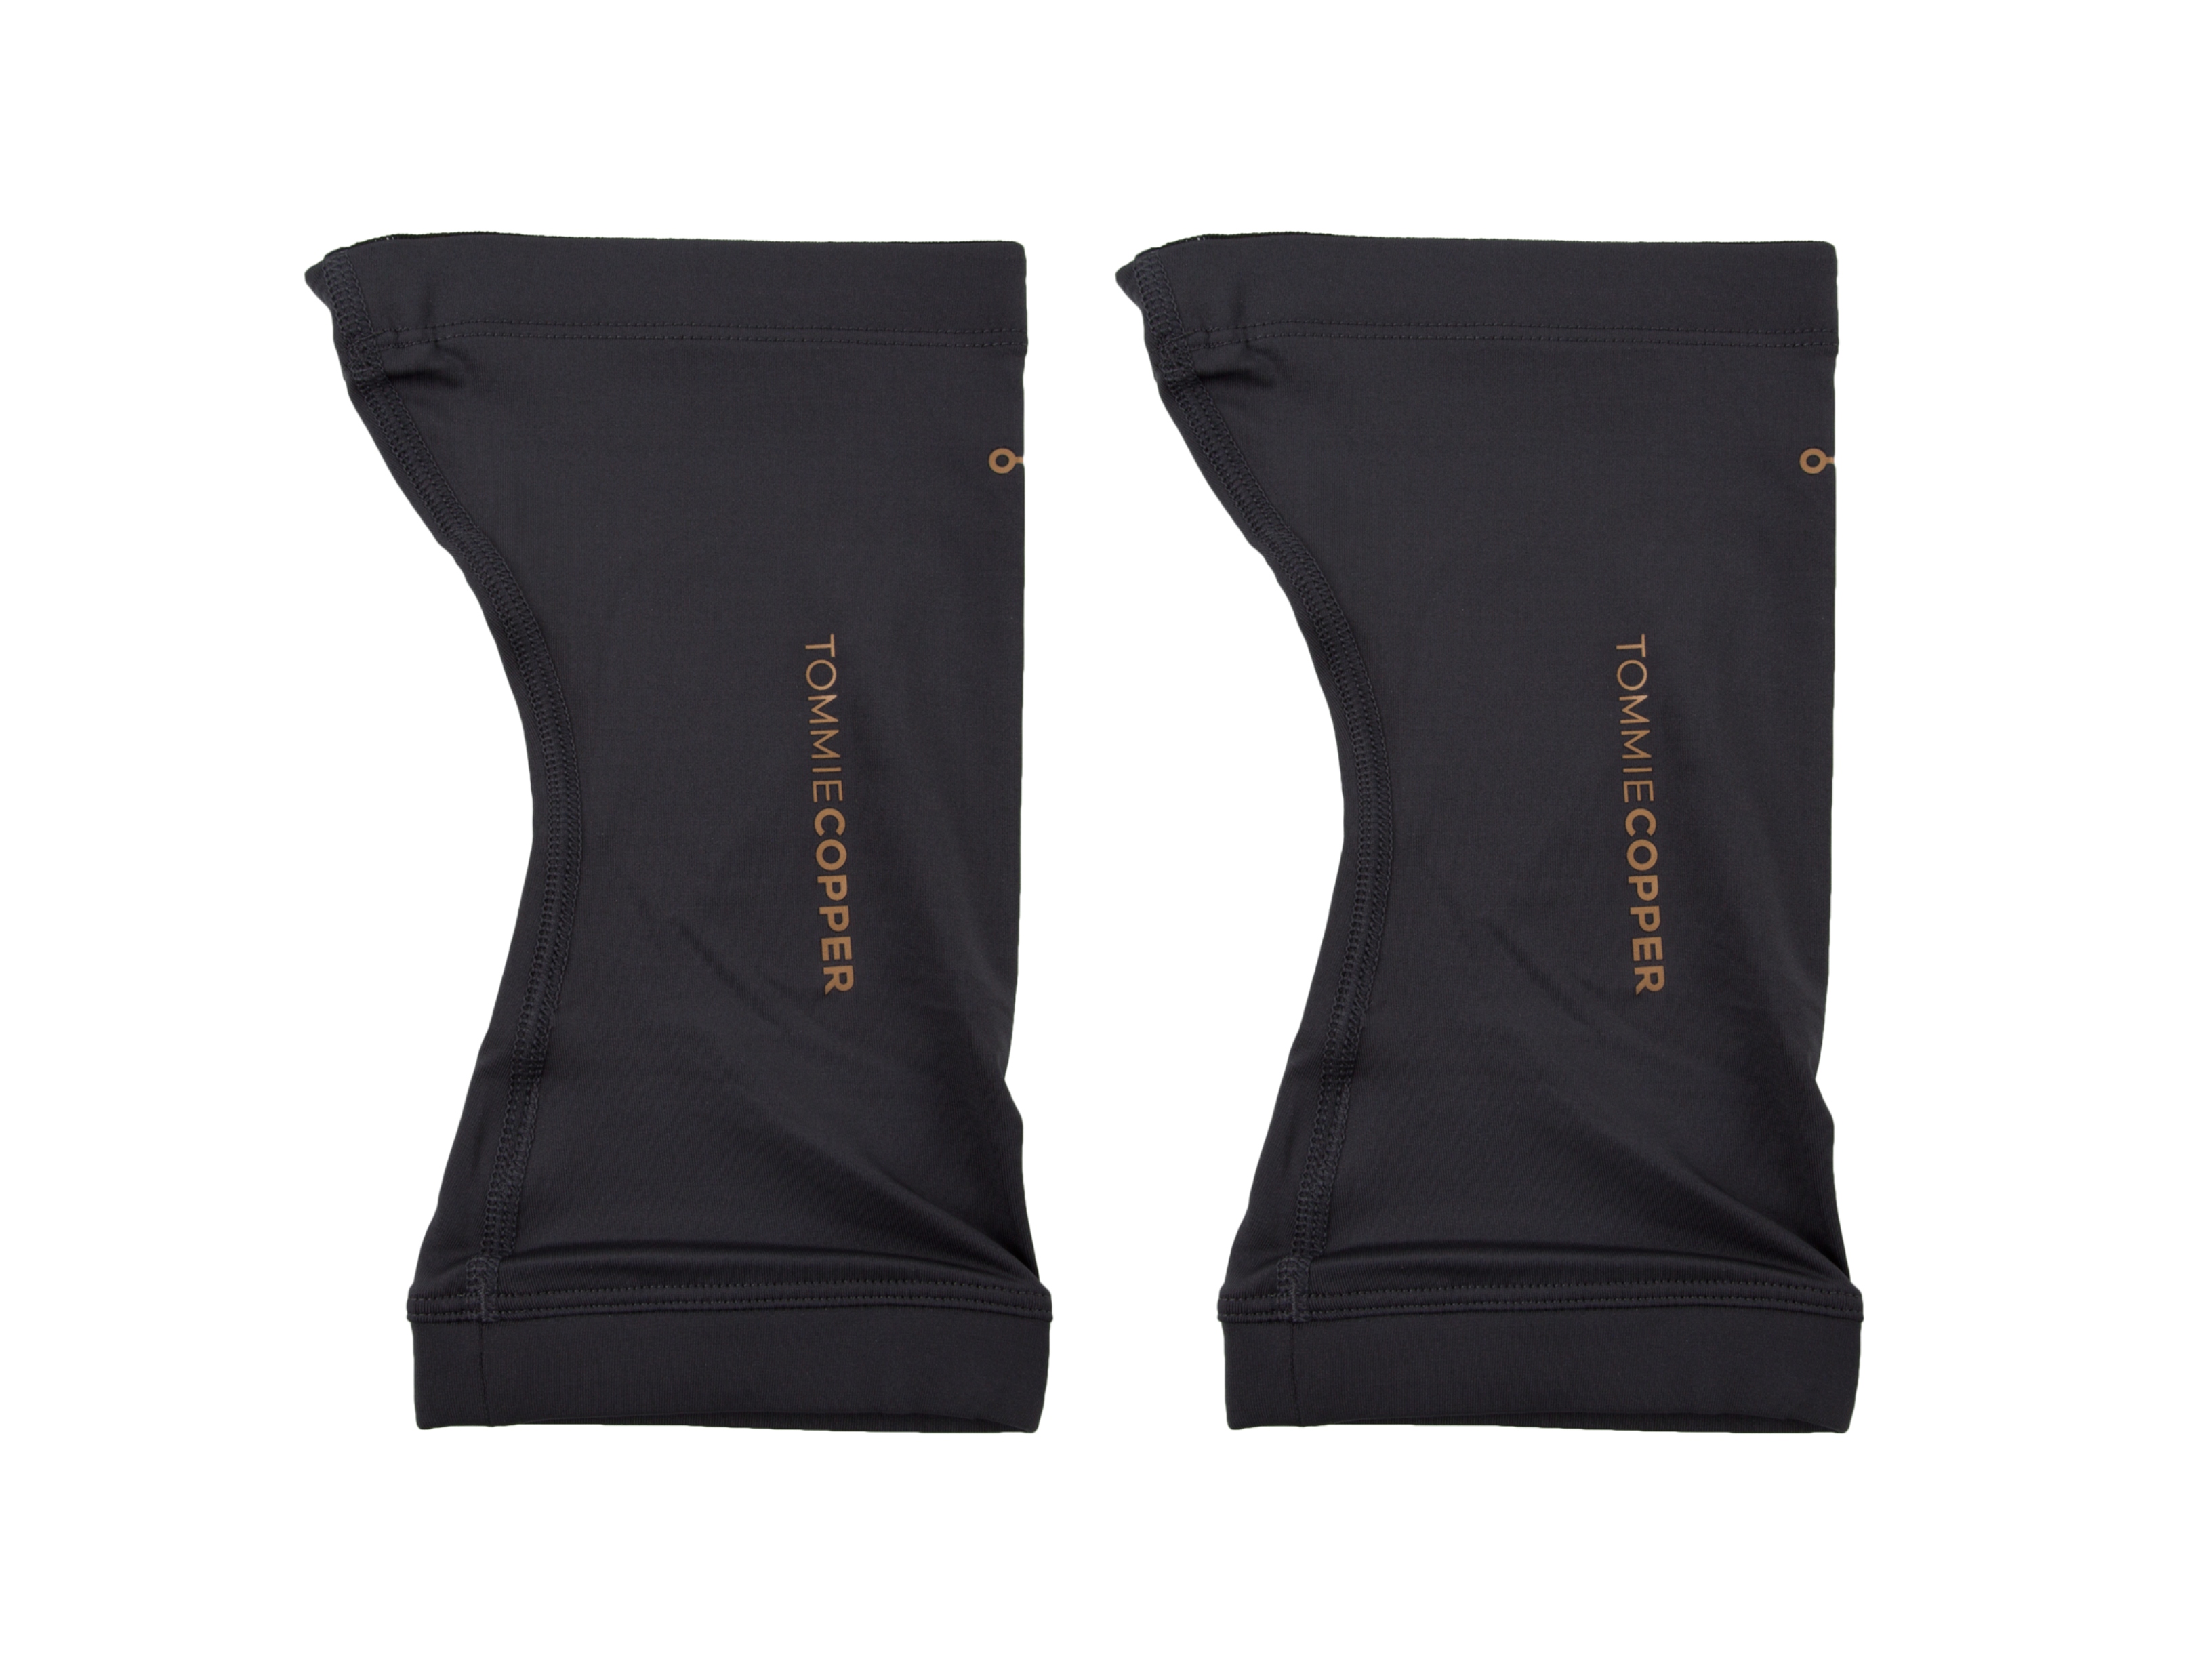 Tommie Copper Compression Knee Sleeve